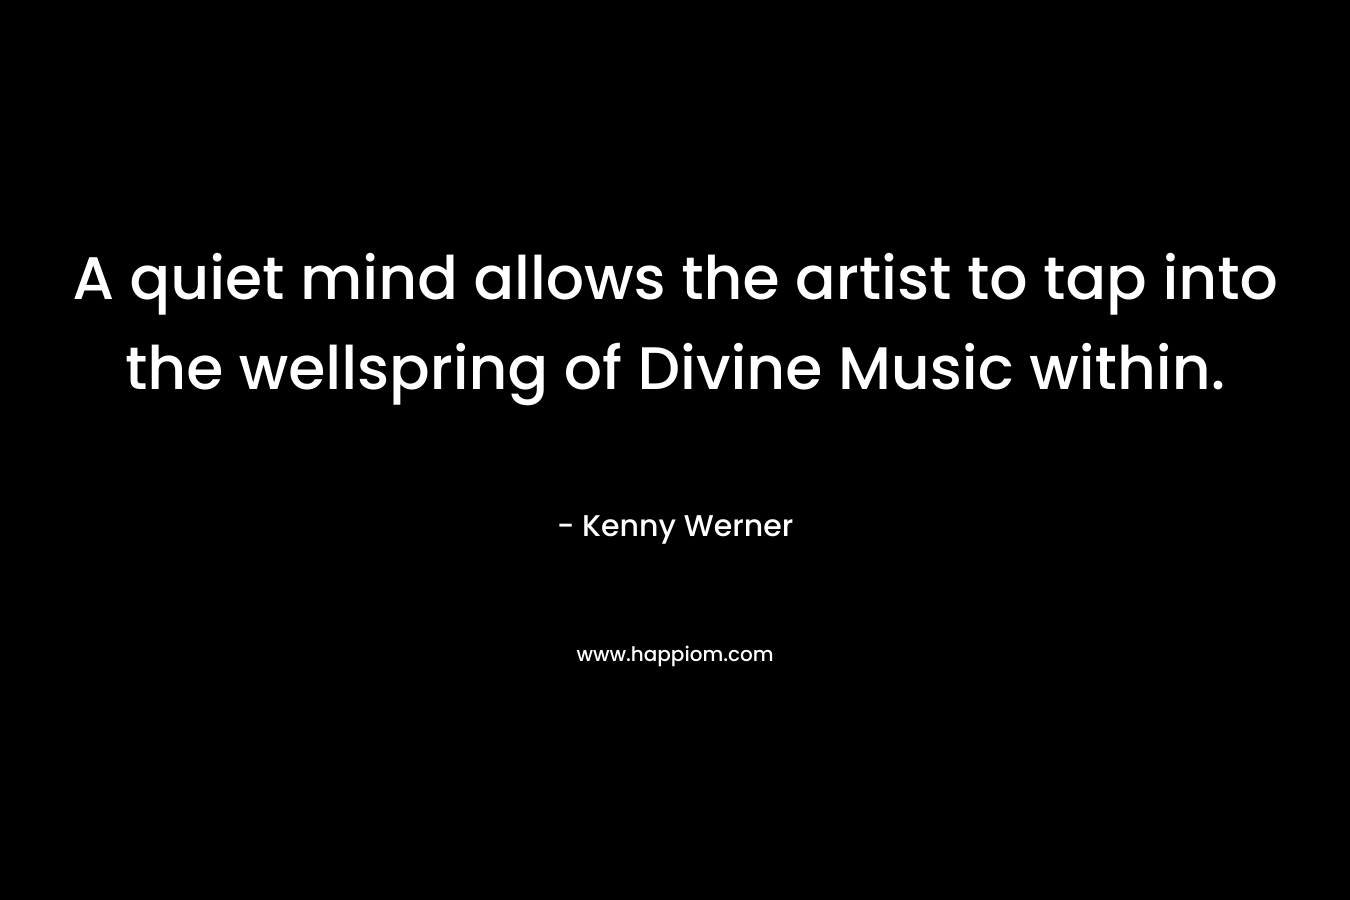 A quiet mind allows the artist to tap into the wellspring of Divine Music within.